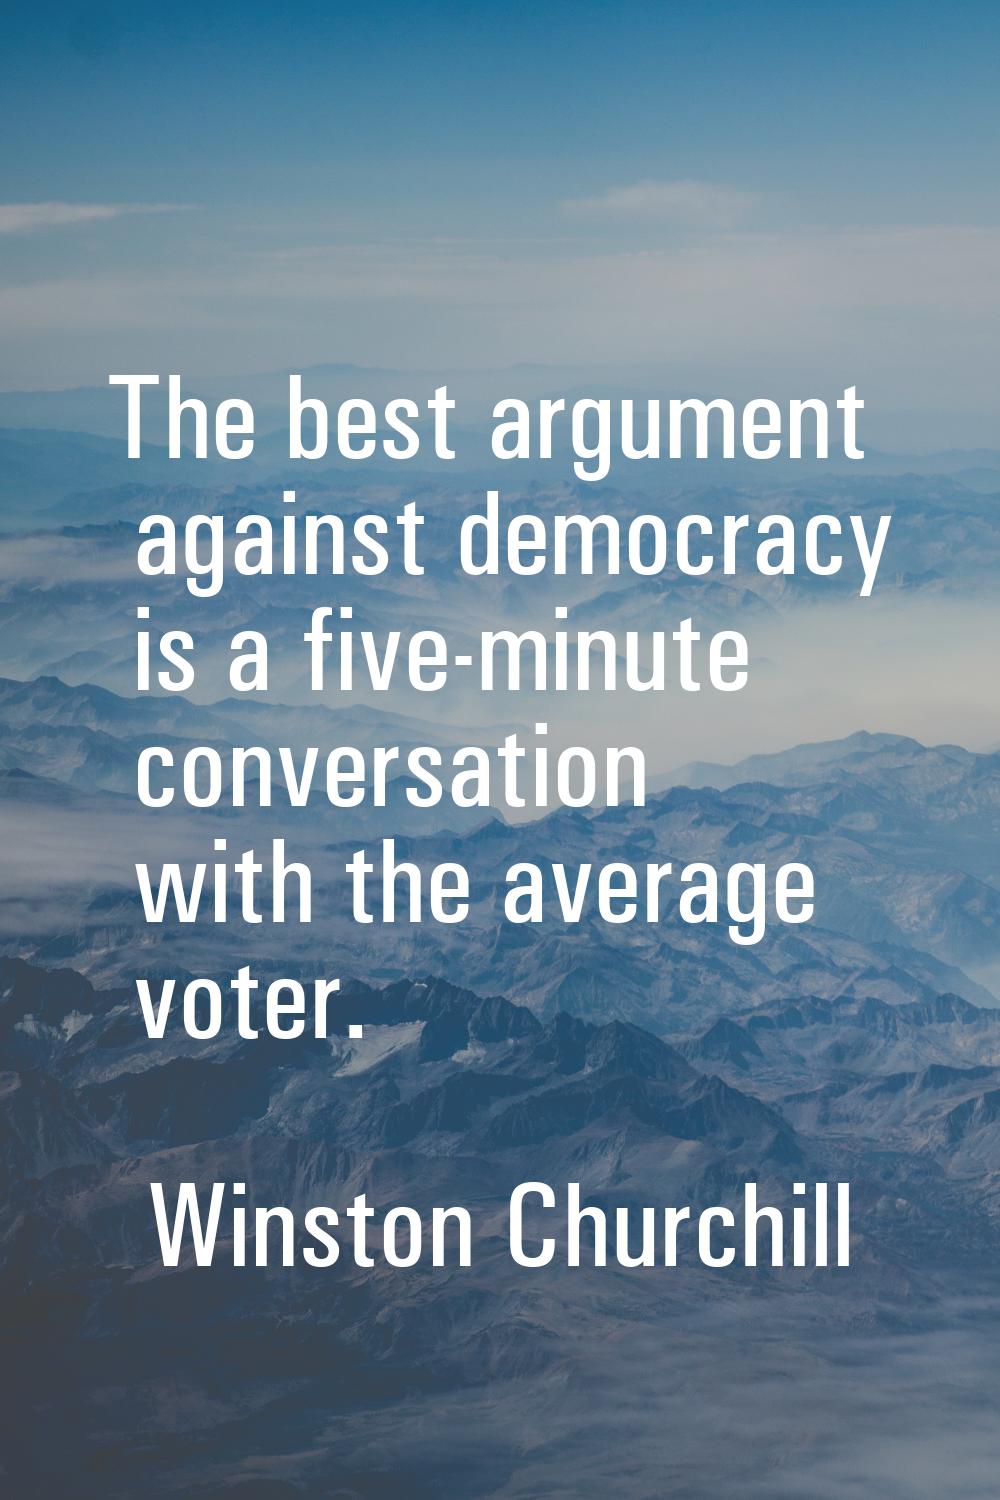 The best argument against democracy is a five-minute conversation with the average voter.